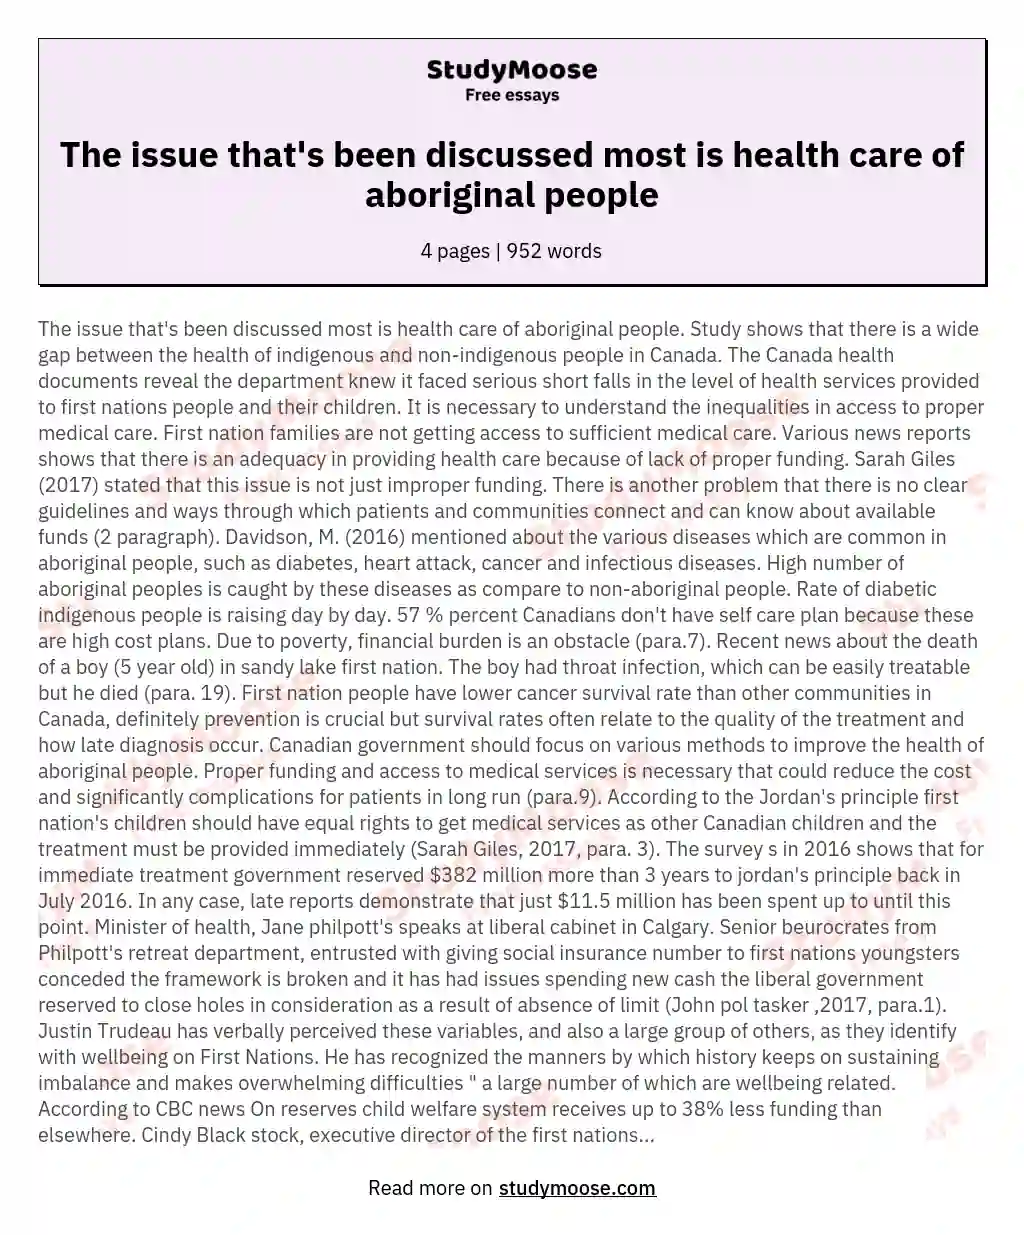 The issue that's been discussed most is health care of aboriginal people essay